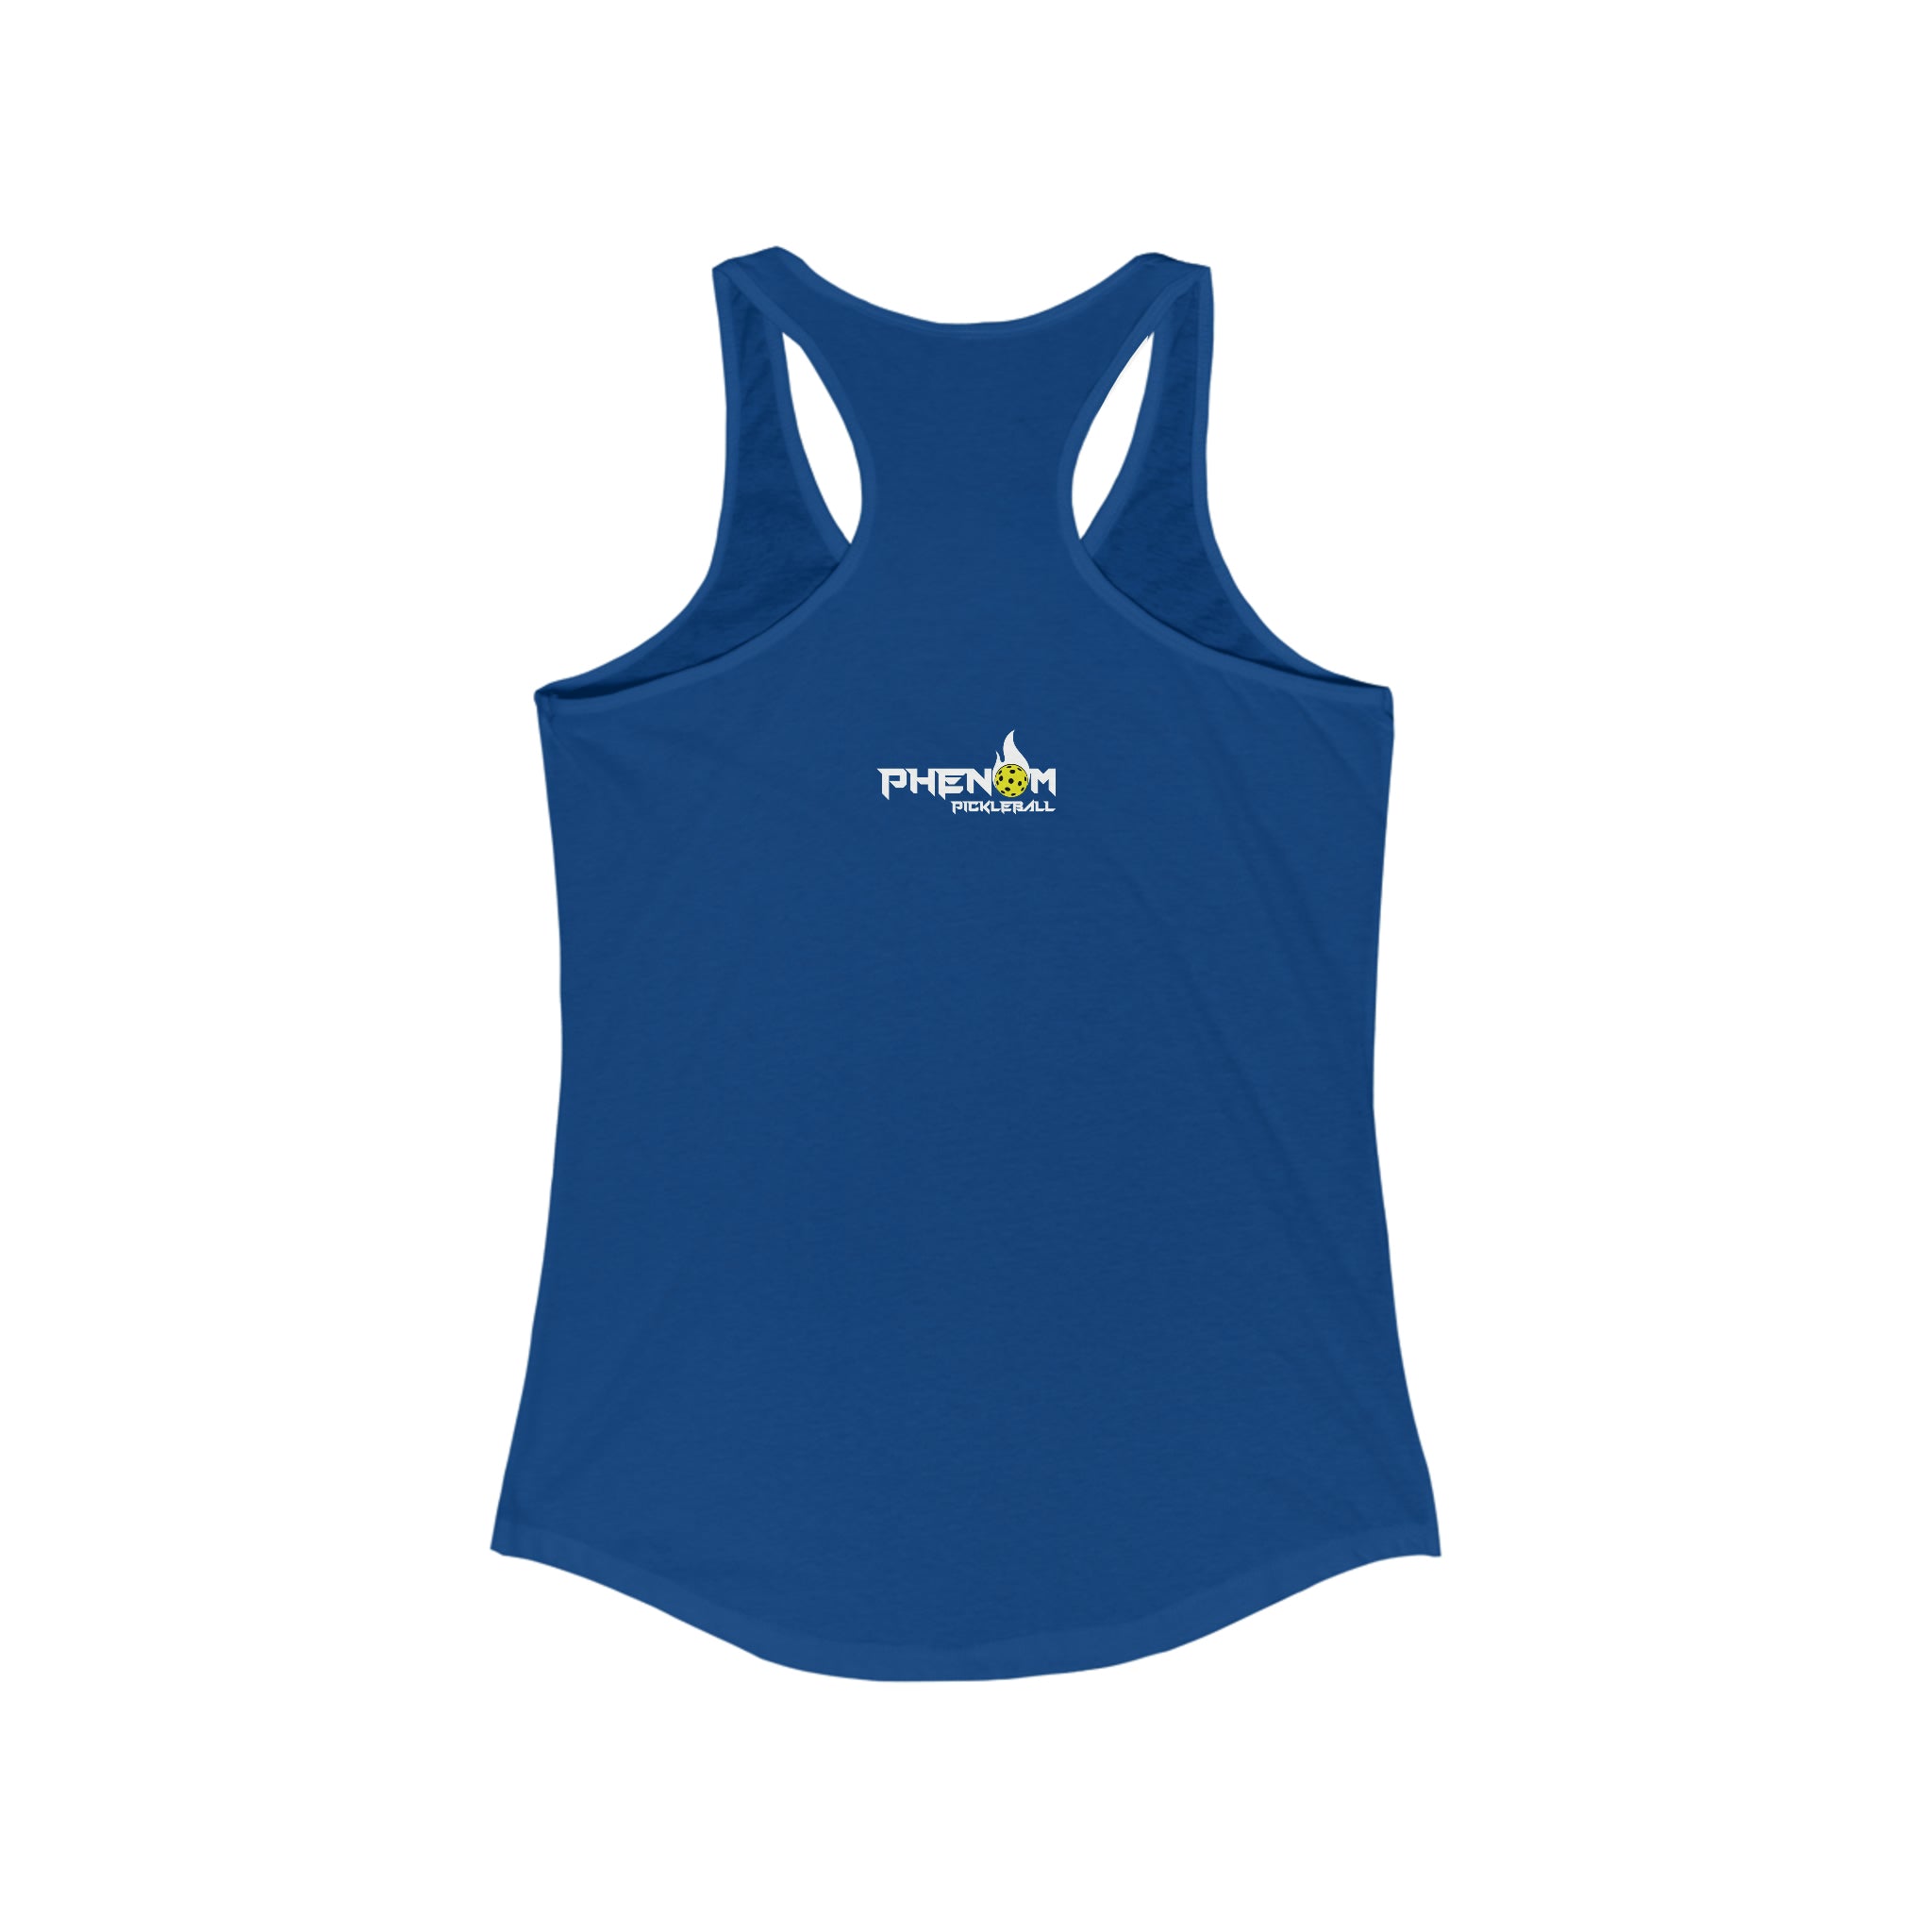 royal blue just here for the dinks and giggles women's racerback tank top pickleball apparel phenom logo back view